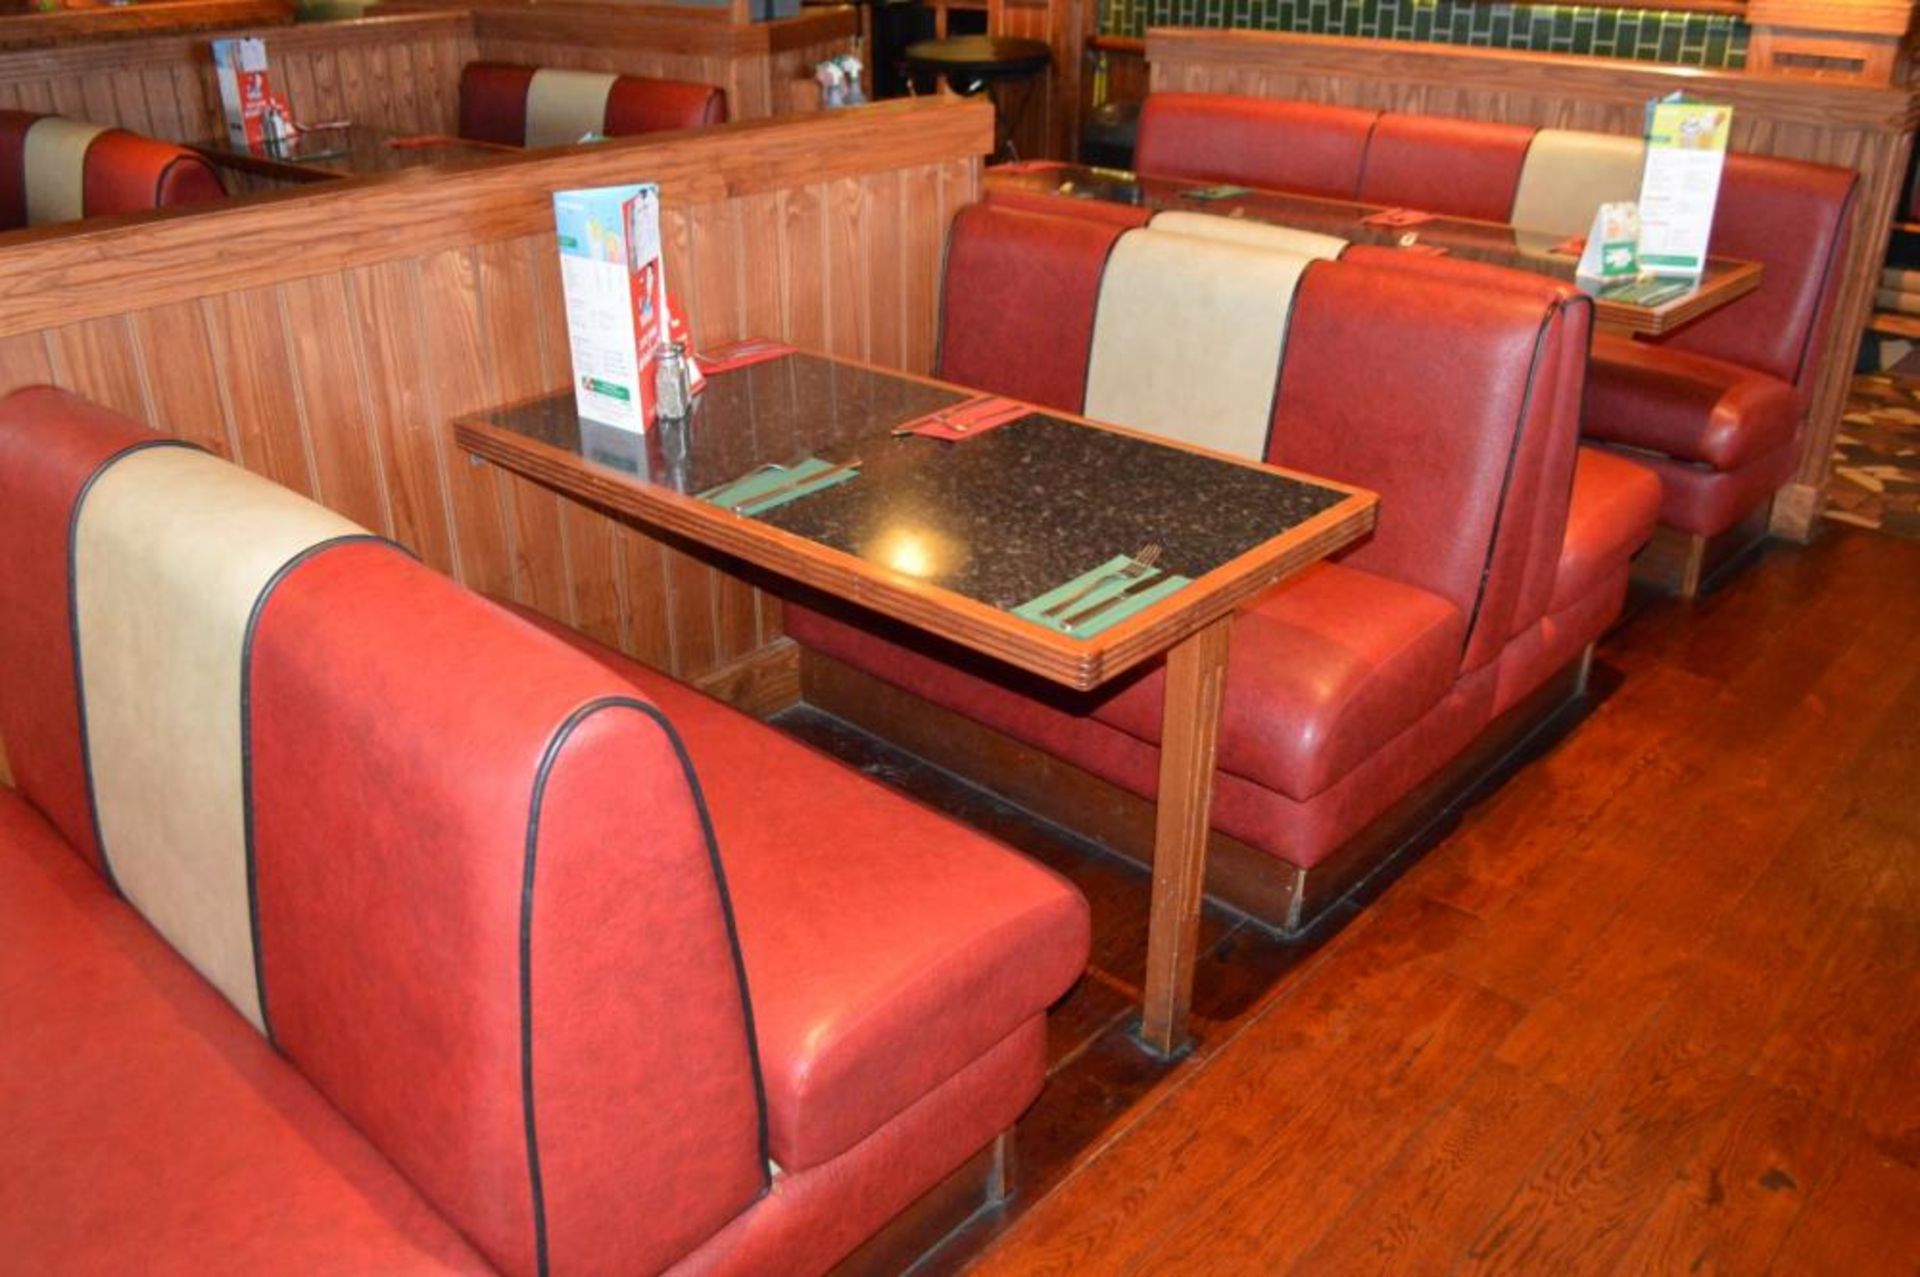 1 x Selection of Cosy Bespoke Seating Booths in a 1950's Retro American Diner Design With Dining Tab - Image 19 of 30